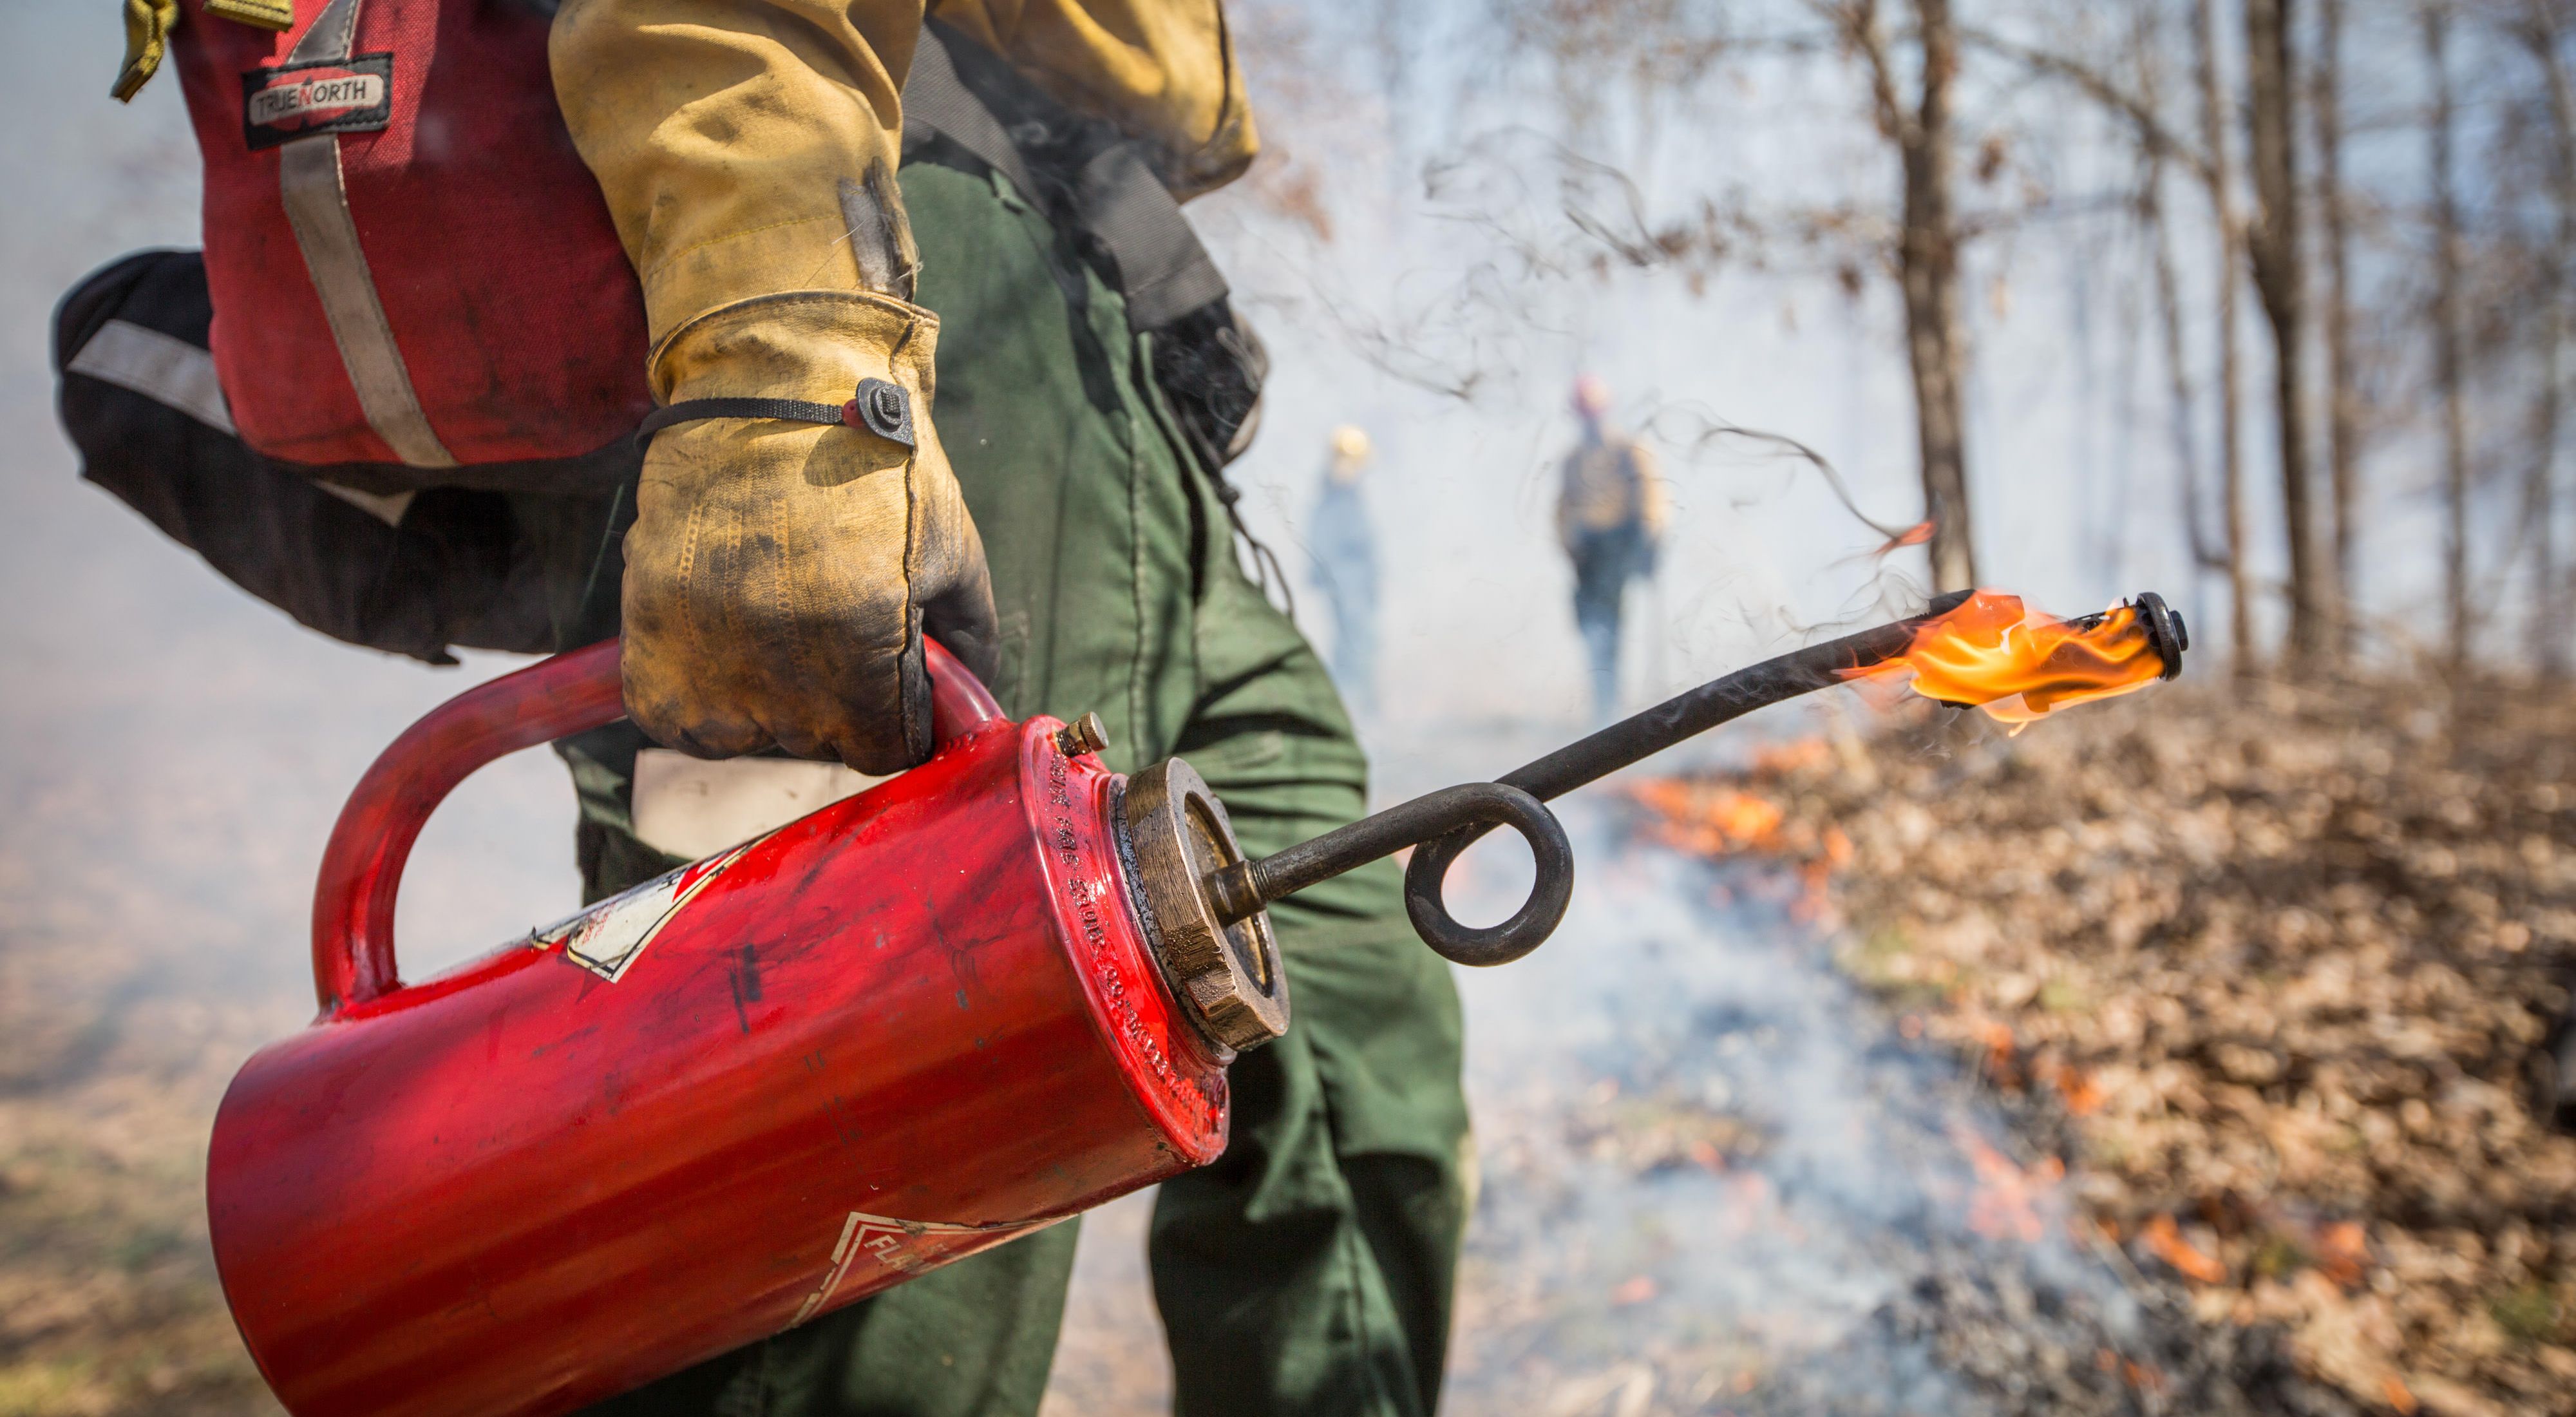 A fire management steward holds  a red drip torch which is used in prescribed fires to create controlled burns and prevent wildfire spread.